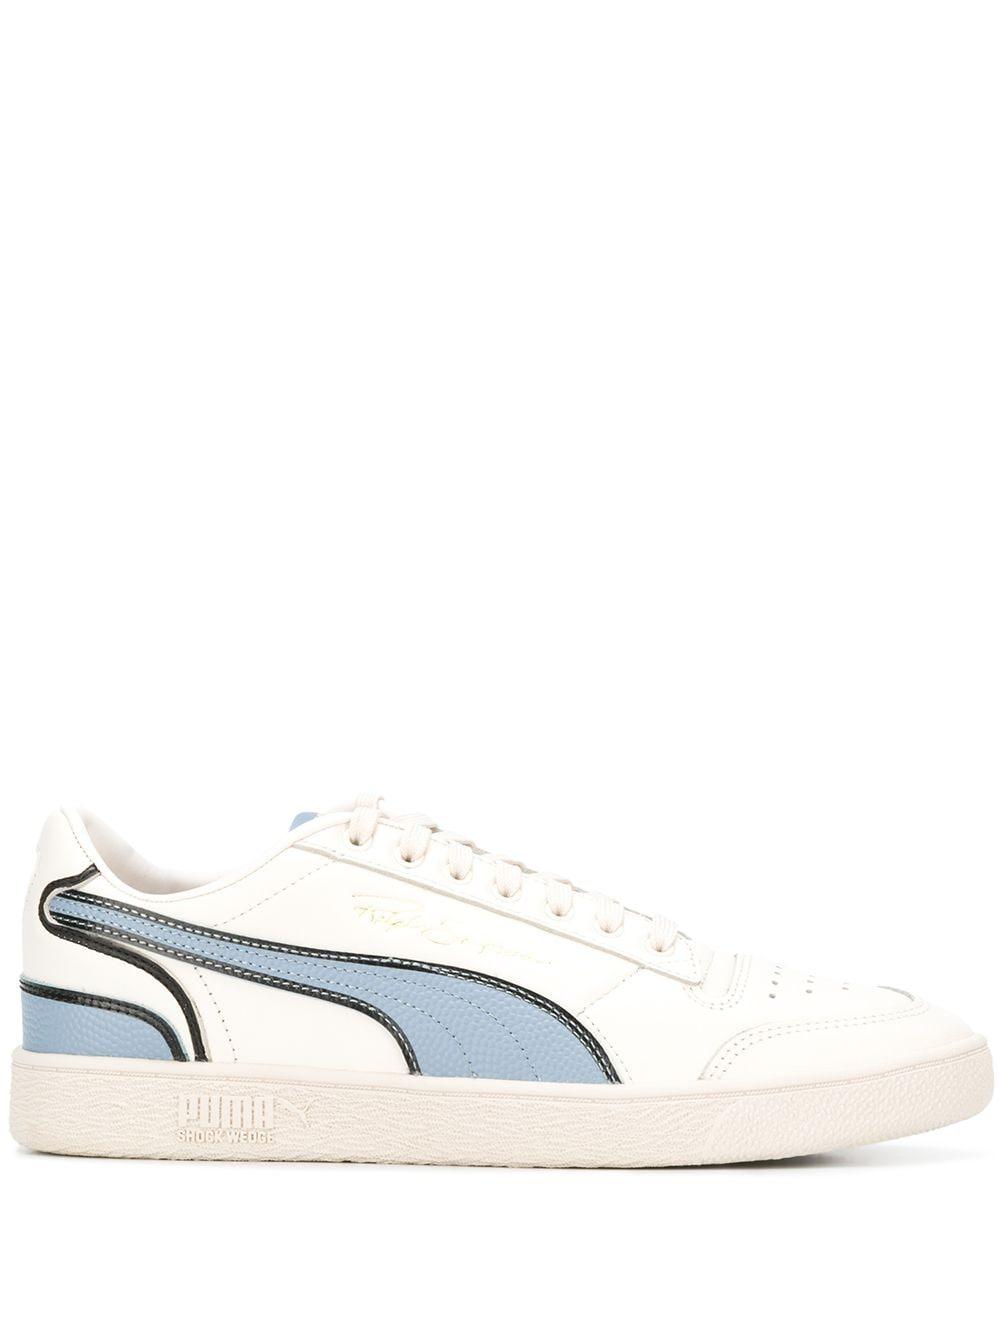 PUMA Leather Shock Wedge Sneakers | Lyst